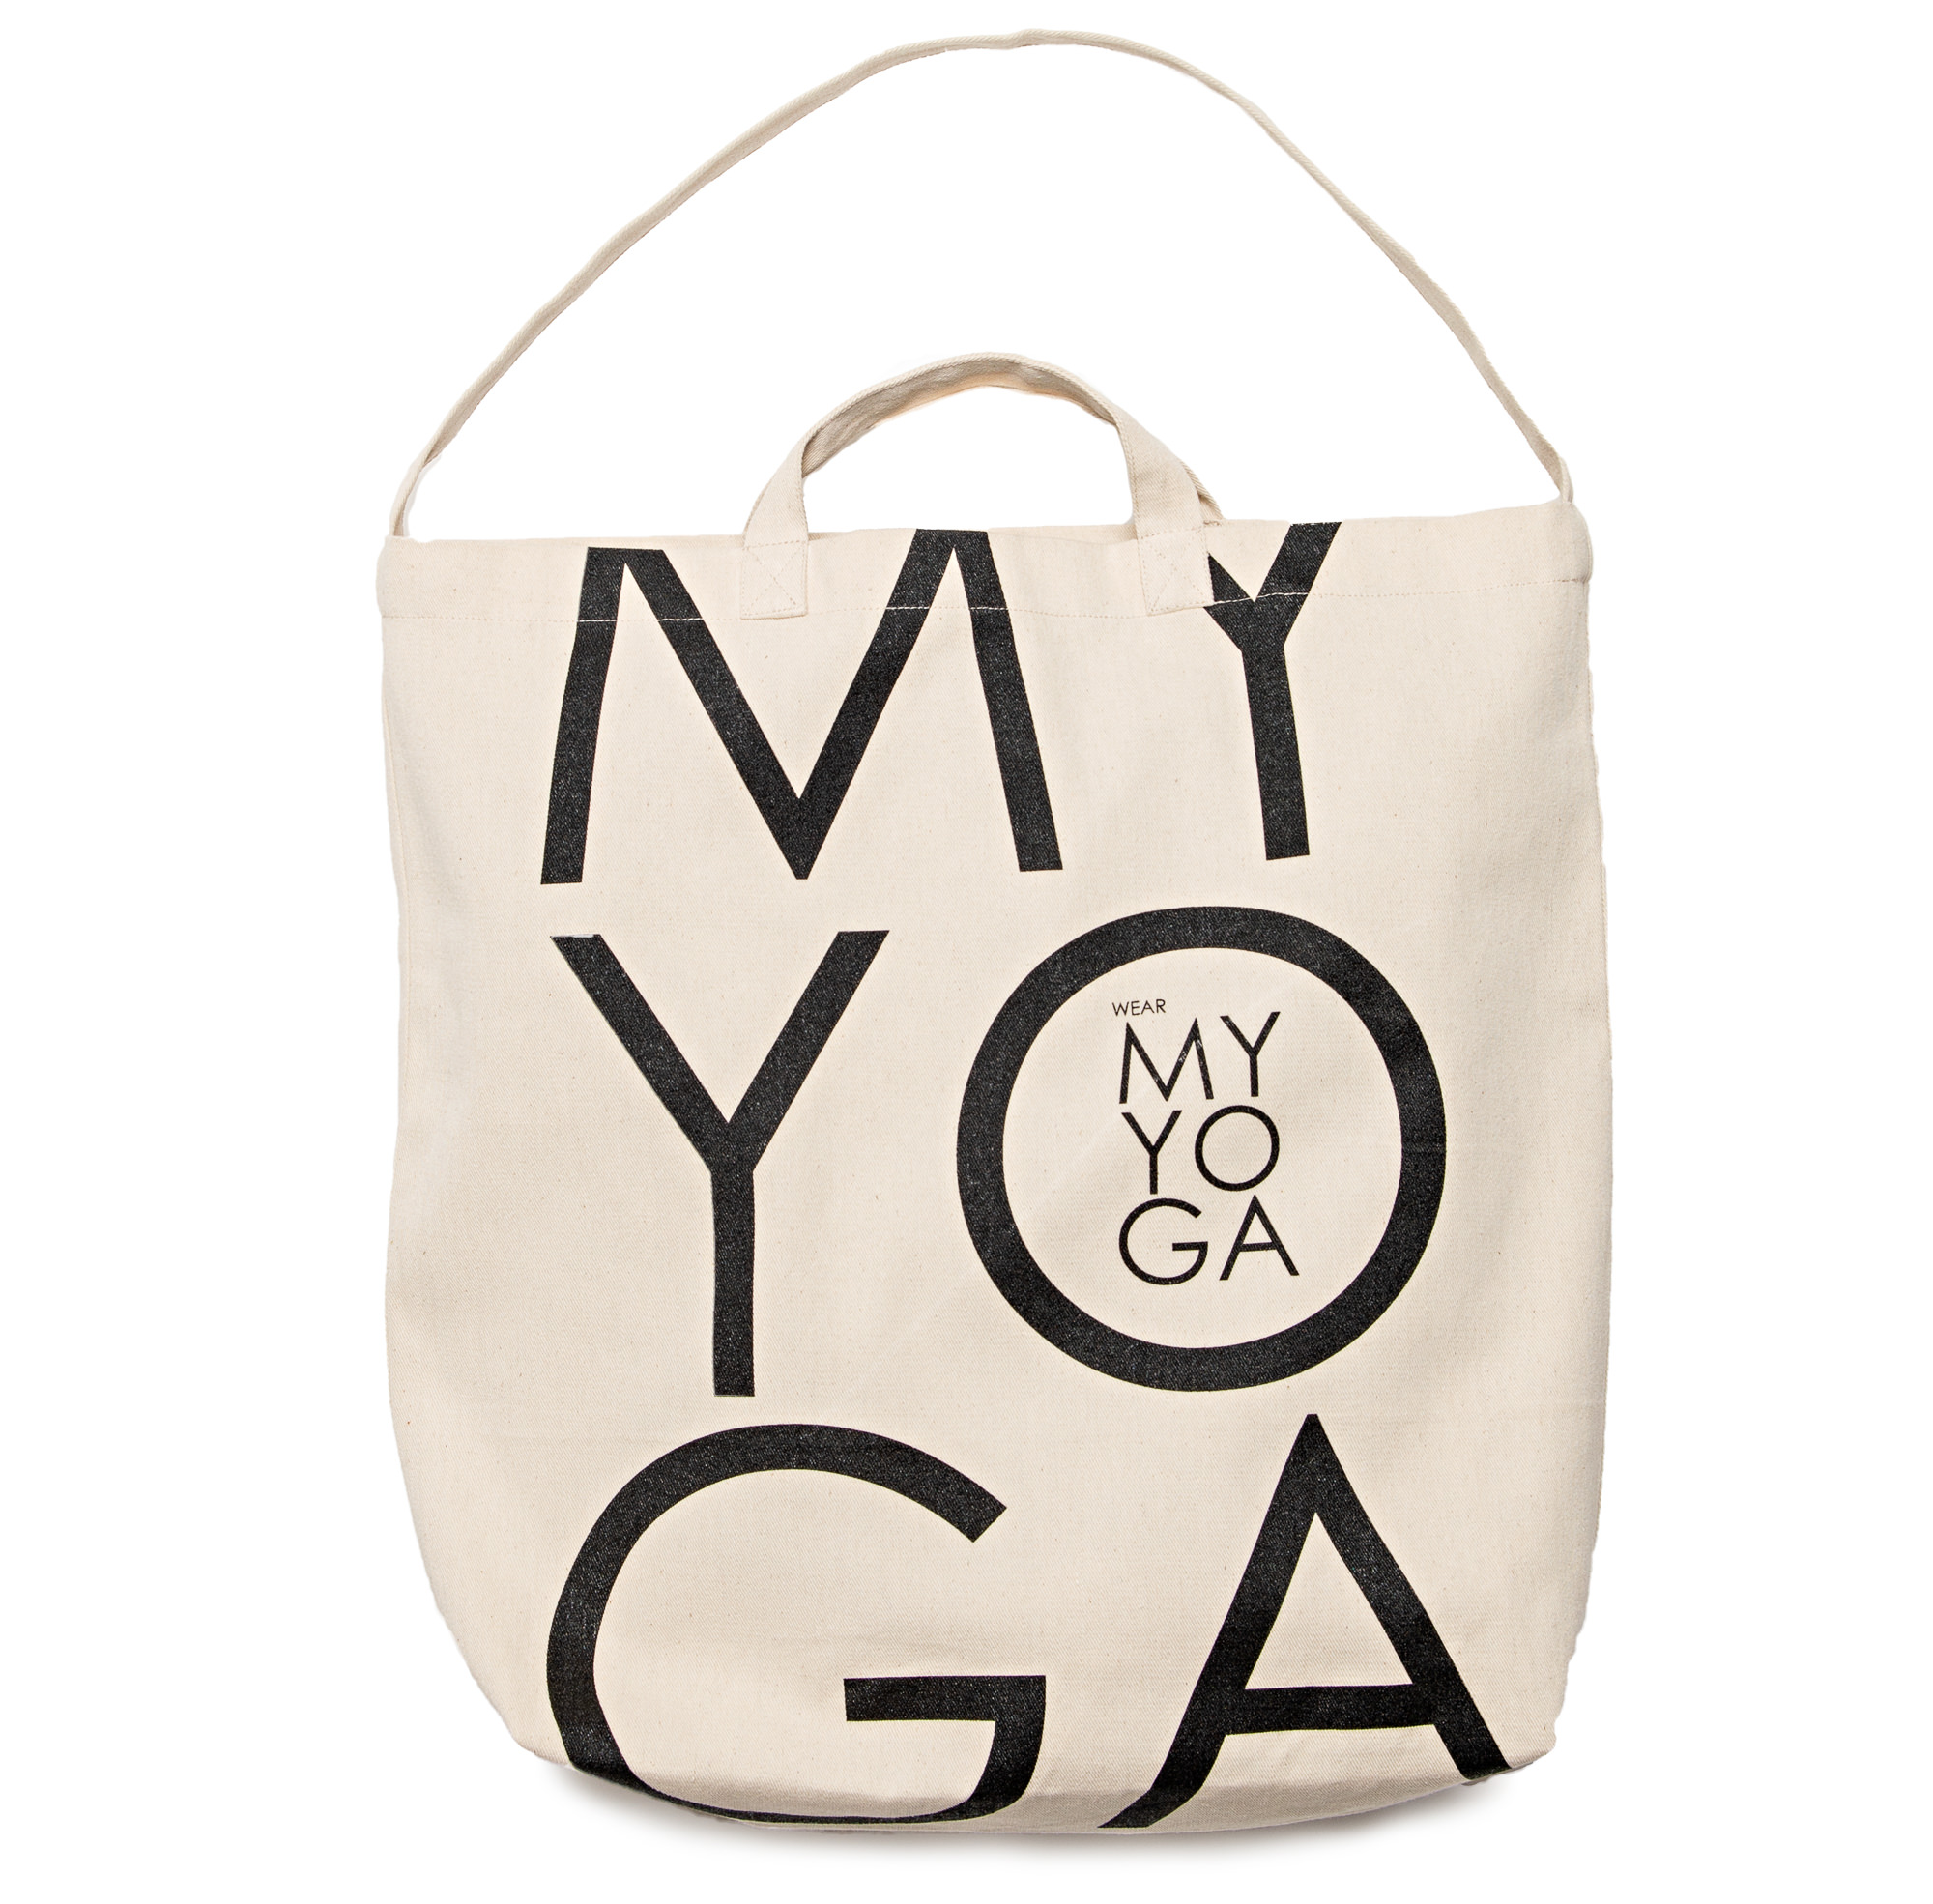 A yoga tote in natural cotton canvas with our logo in black